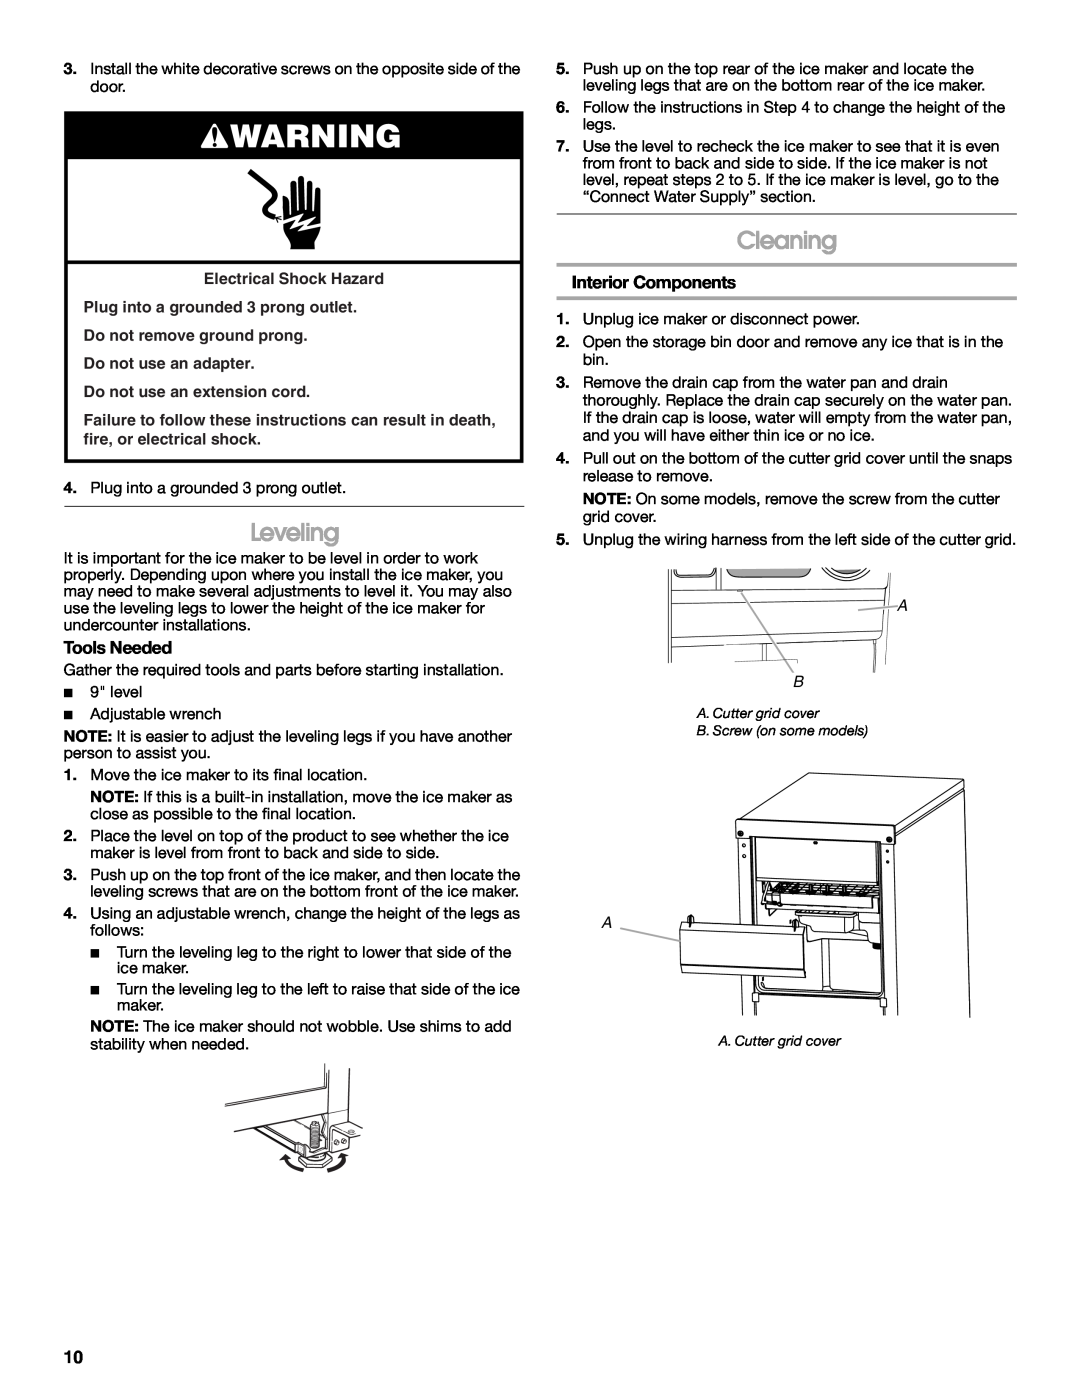 Whirlpool W10541636A Leveling, Cleaning, Interior Components, Tools Needed, Do not use an extension cord 